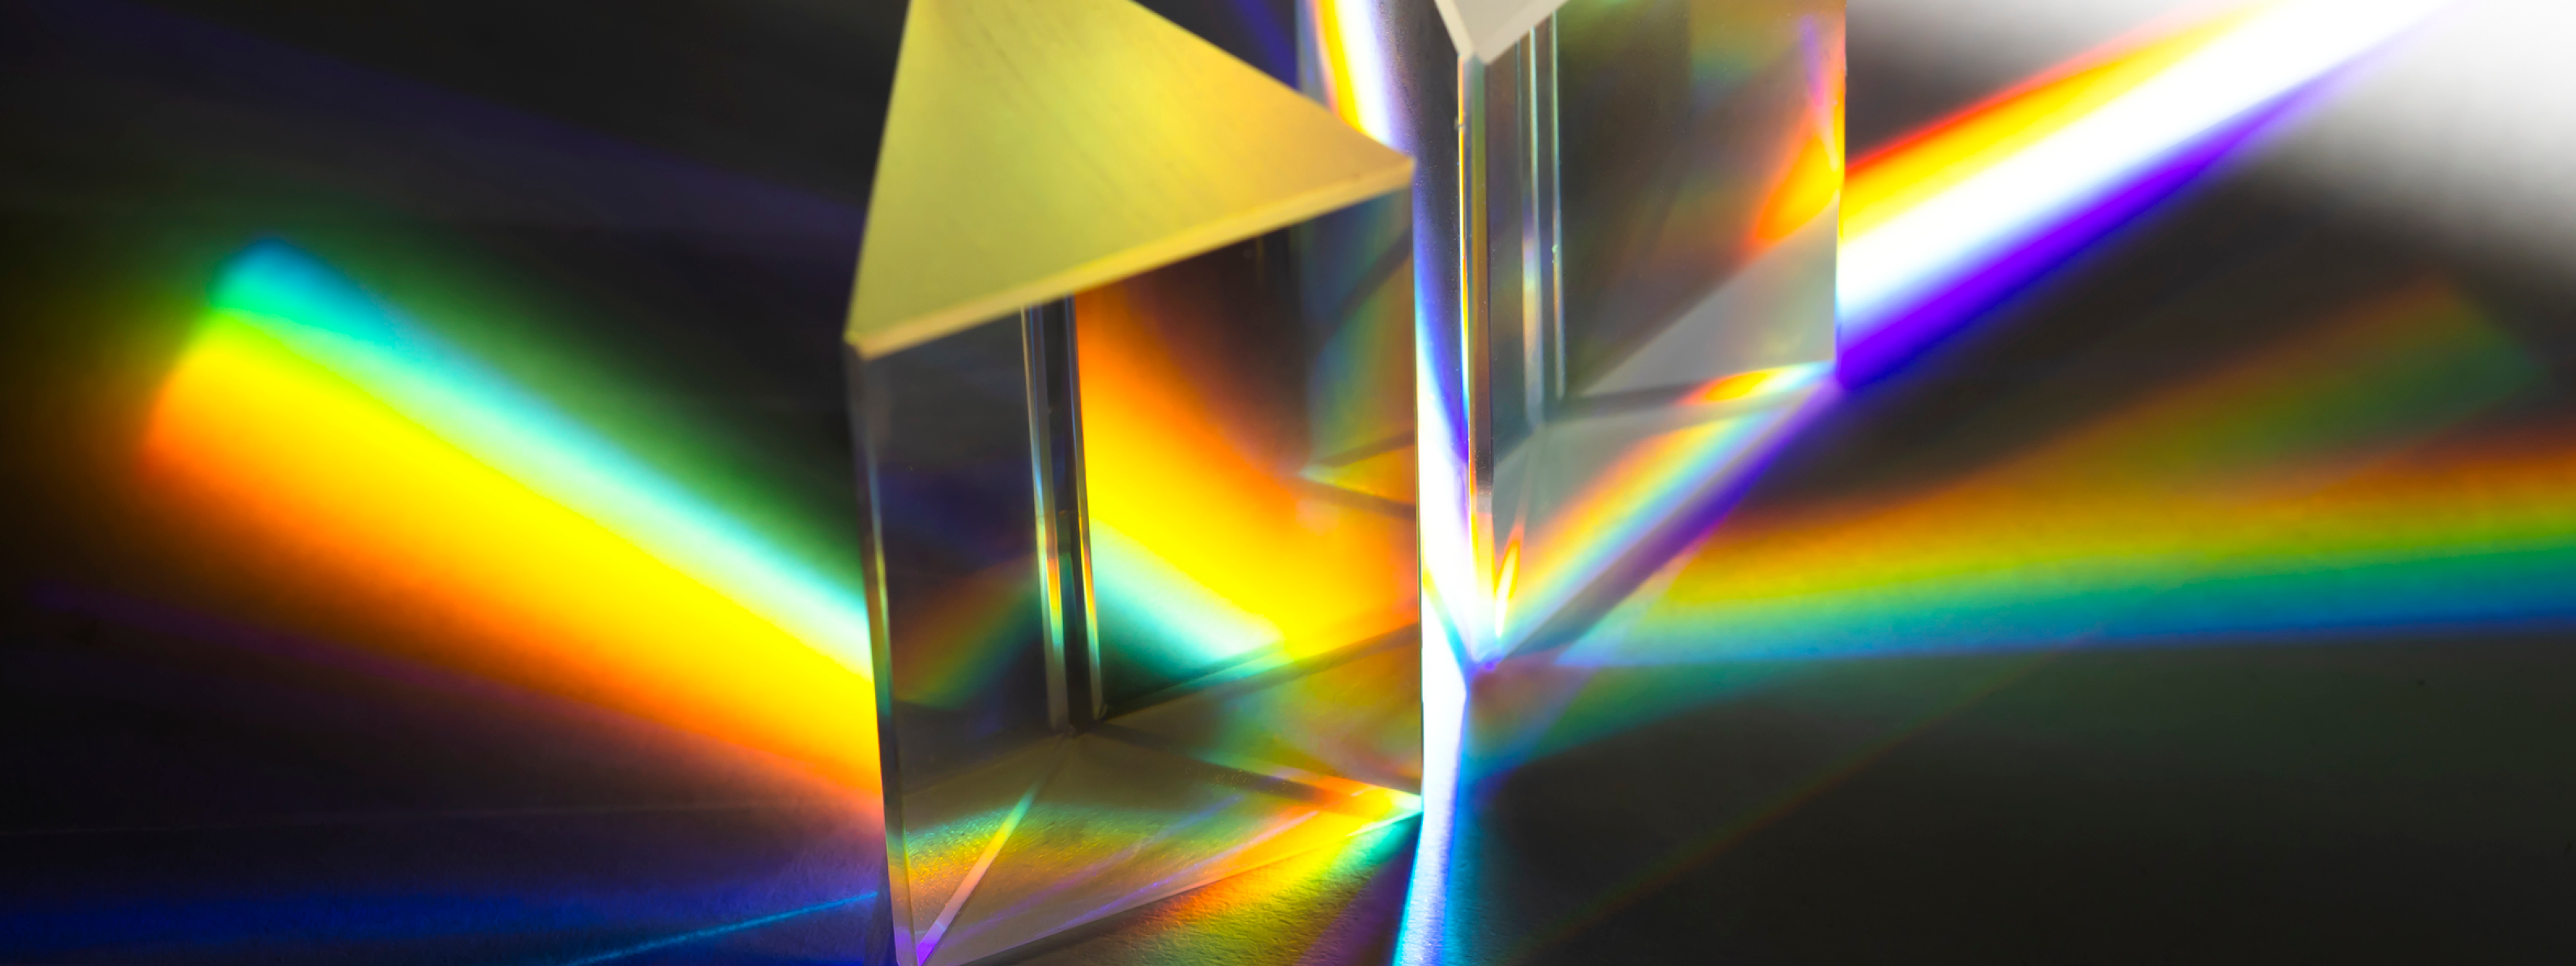 Triangular prisms reflecting color.